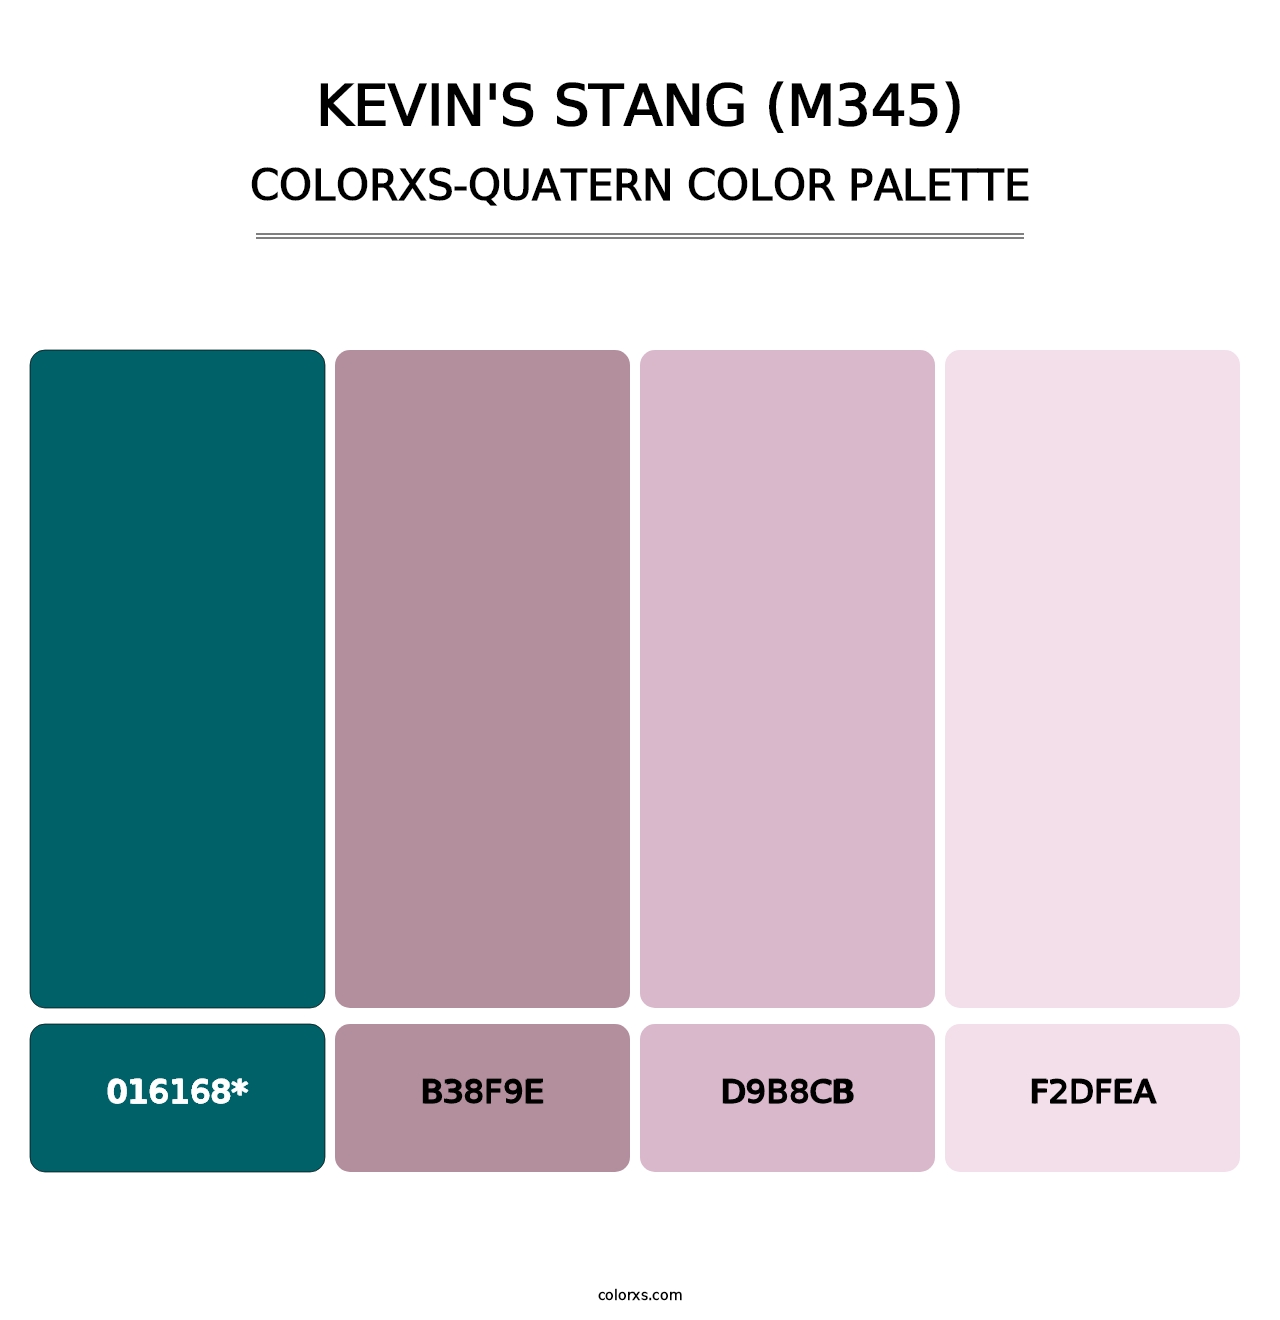 Kevin's Stang (M345) - Colorxs Quatern Palette